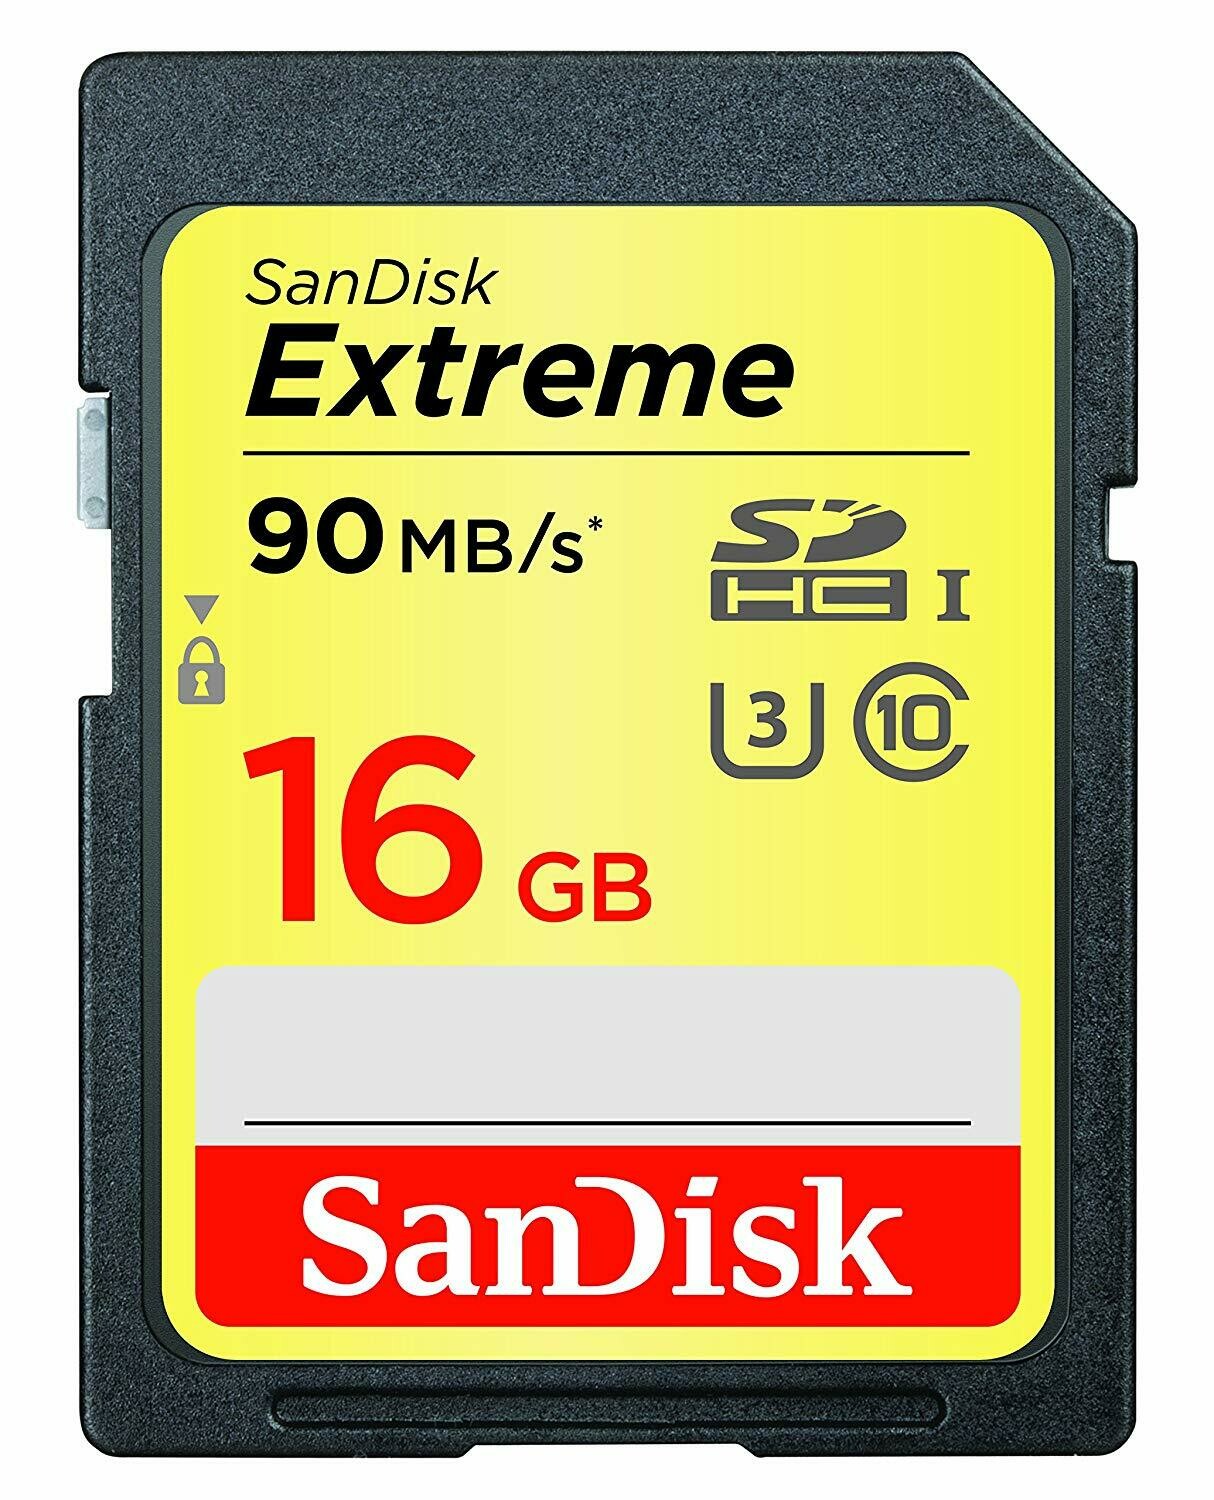 SanDisk Extreme 16GB SDHC Memory Card 80MB